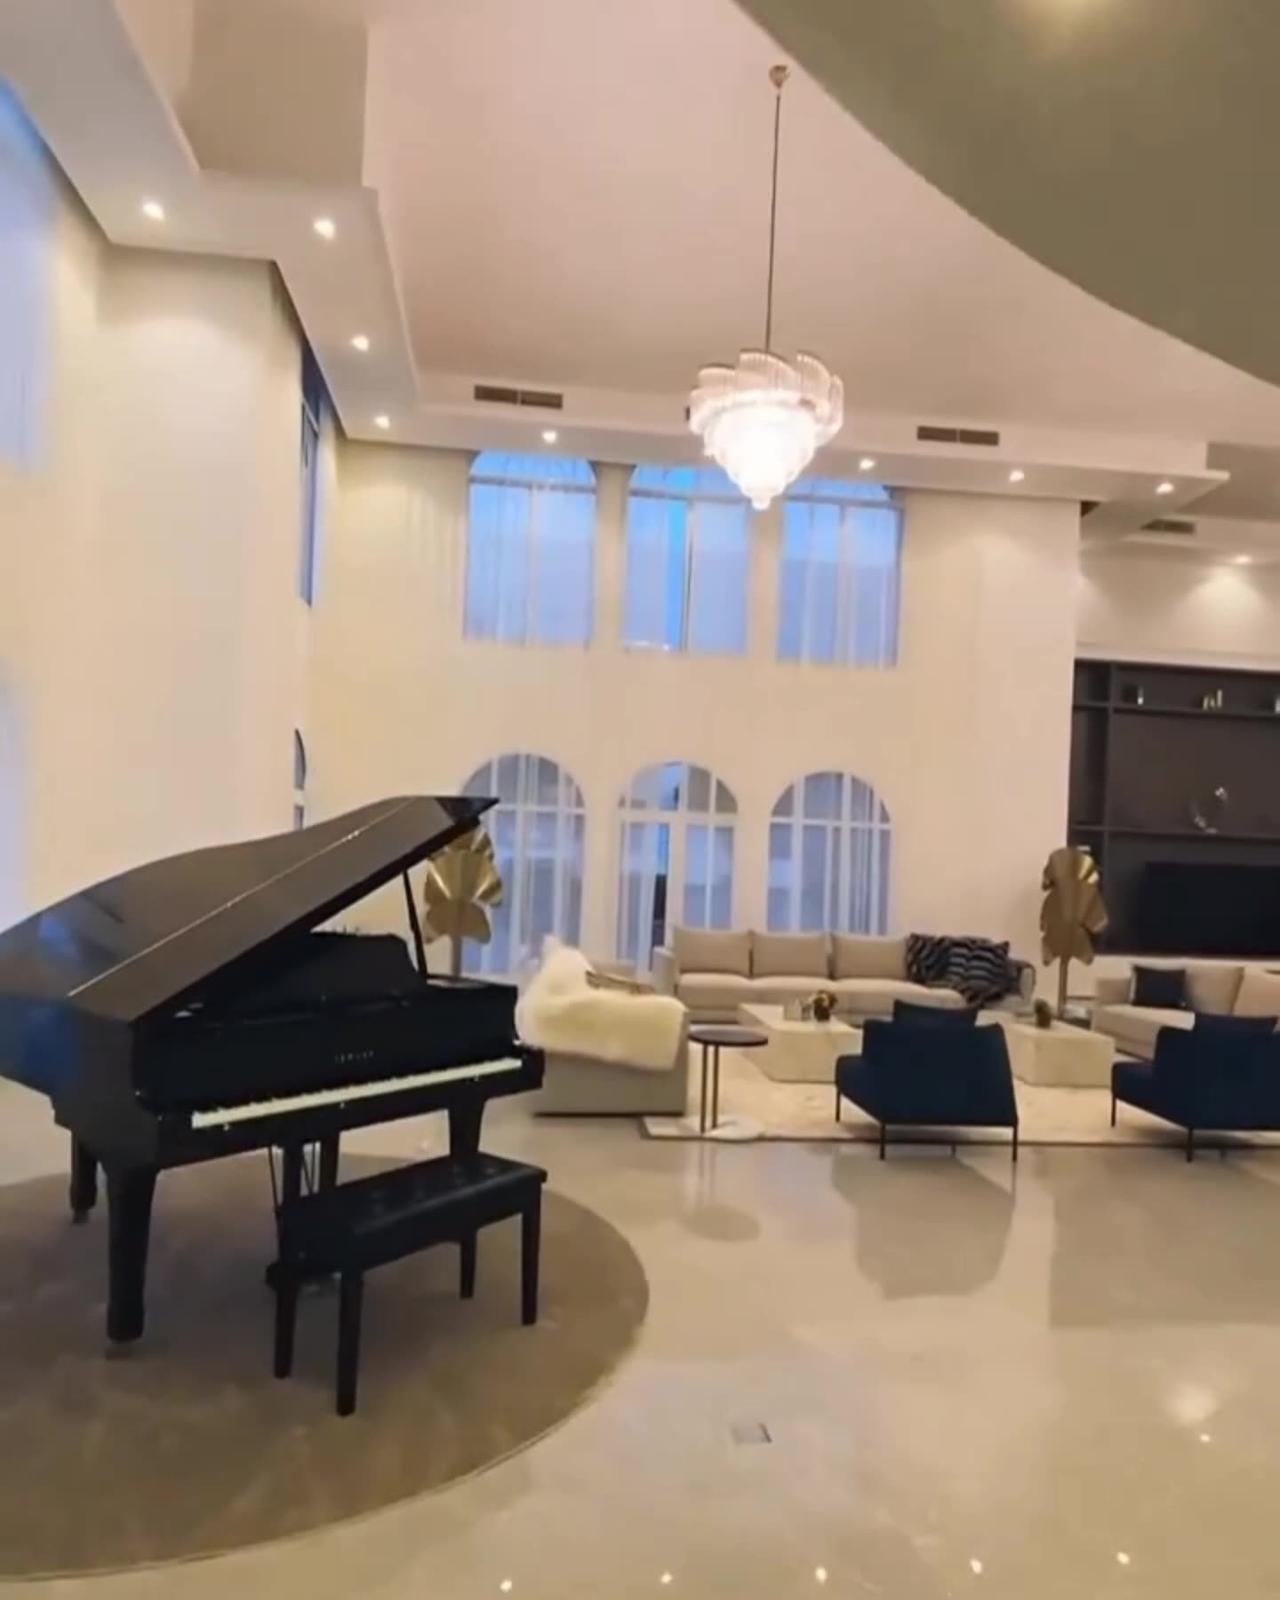 A Inside Look of Andrew Tate's Dubai Mansion